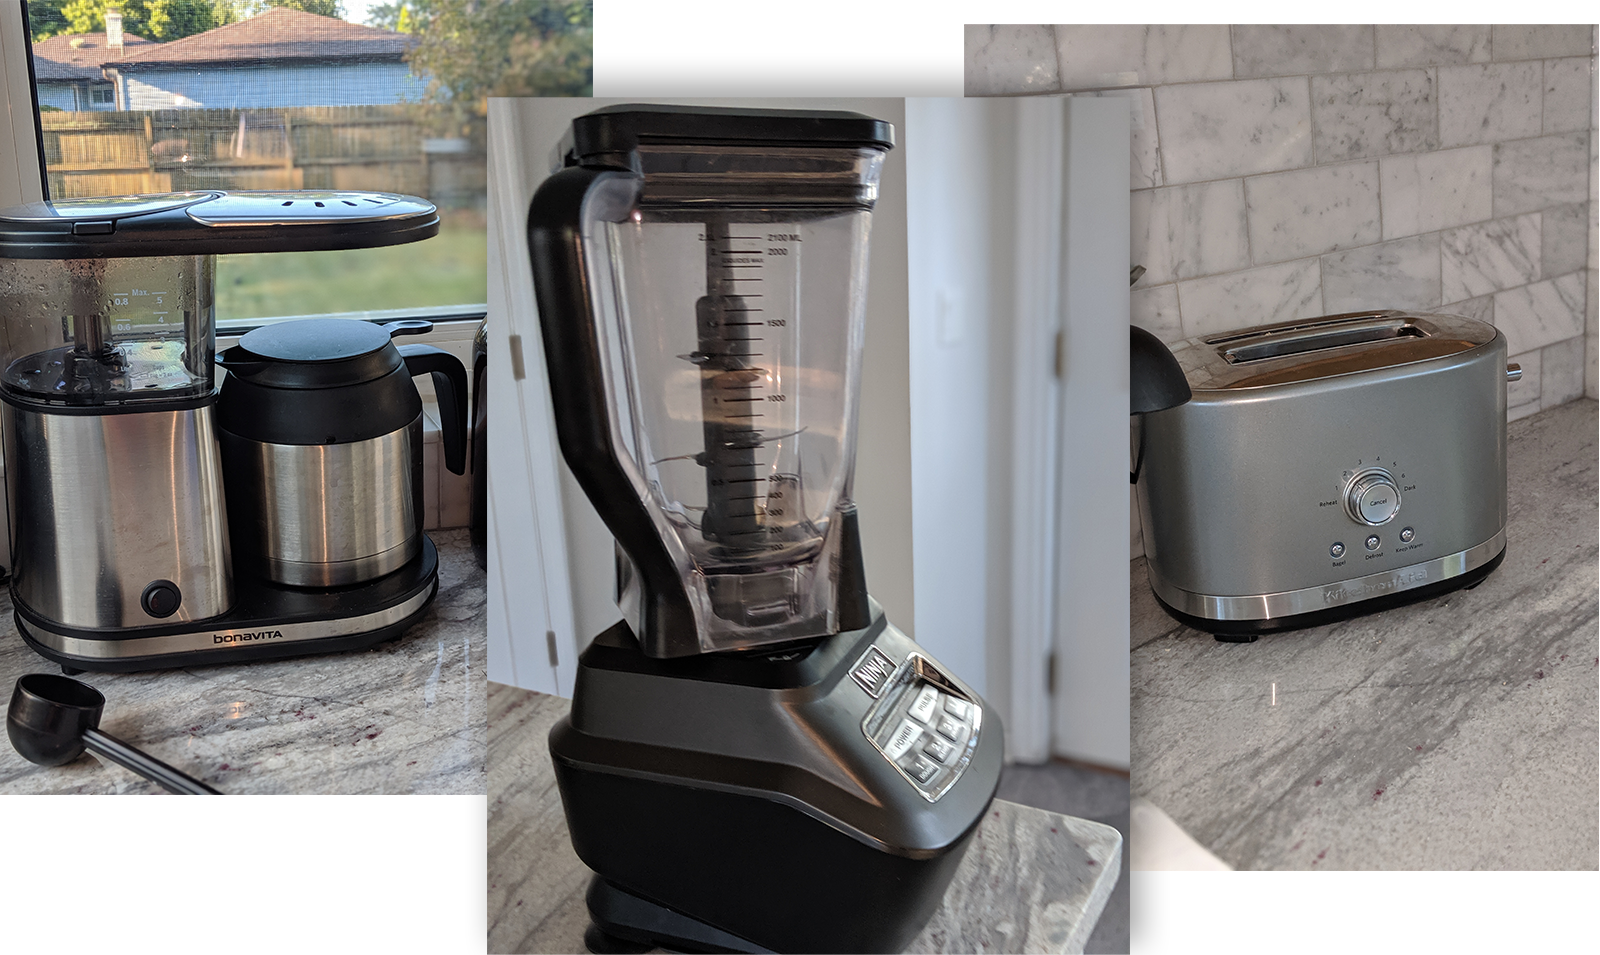 coffee-maker-blender-toaster-kitchen-counter-collage